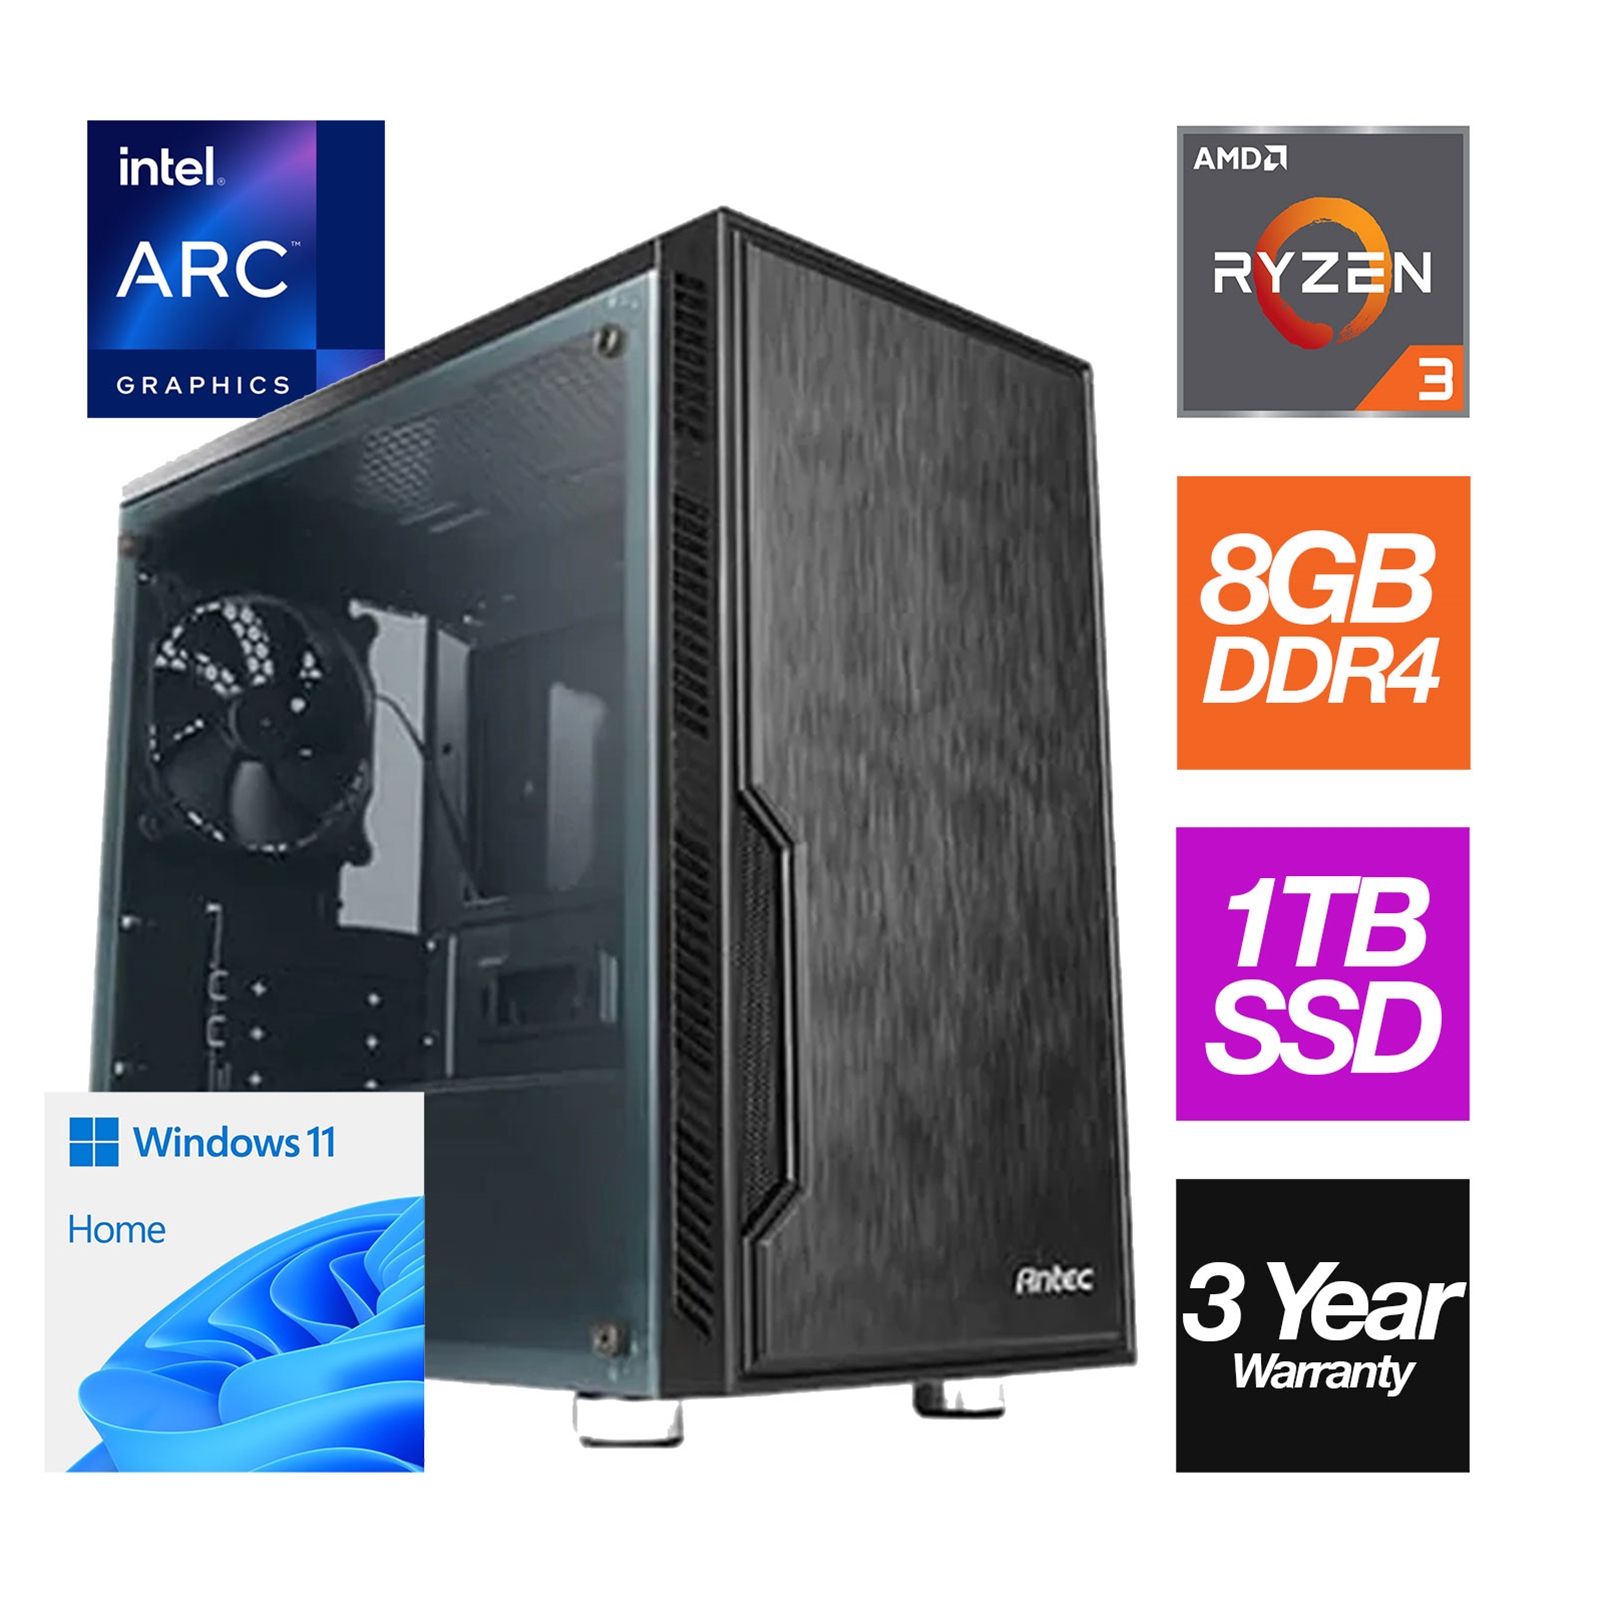 AMD Ryzen 3 4100 4 Core Processor, 8 Threads, 3.8Ghz (4.0GHz Boost) CPU, 8GB DDR4 RAM, 1TB SSD, Intel Arc A380 6GB Graphics, Windows 11 Home, Antec VSK Chassis with Window Side - Pre-Built PC